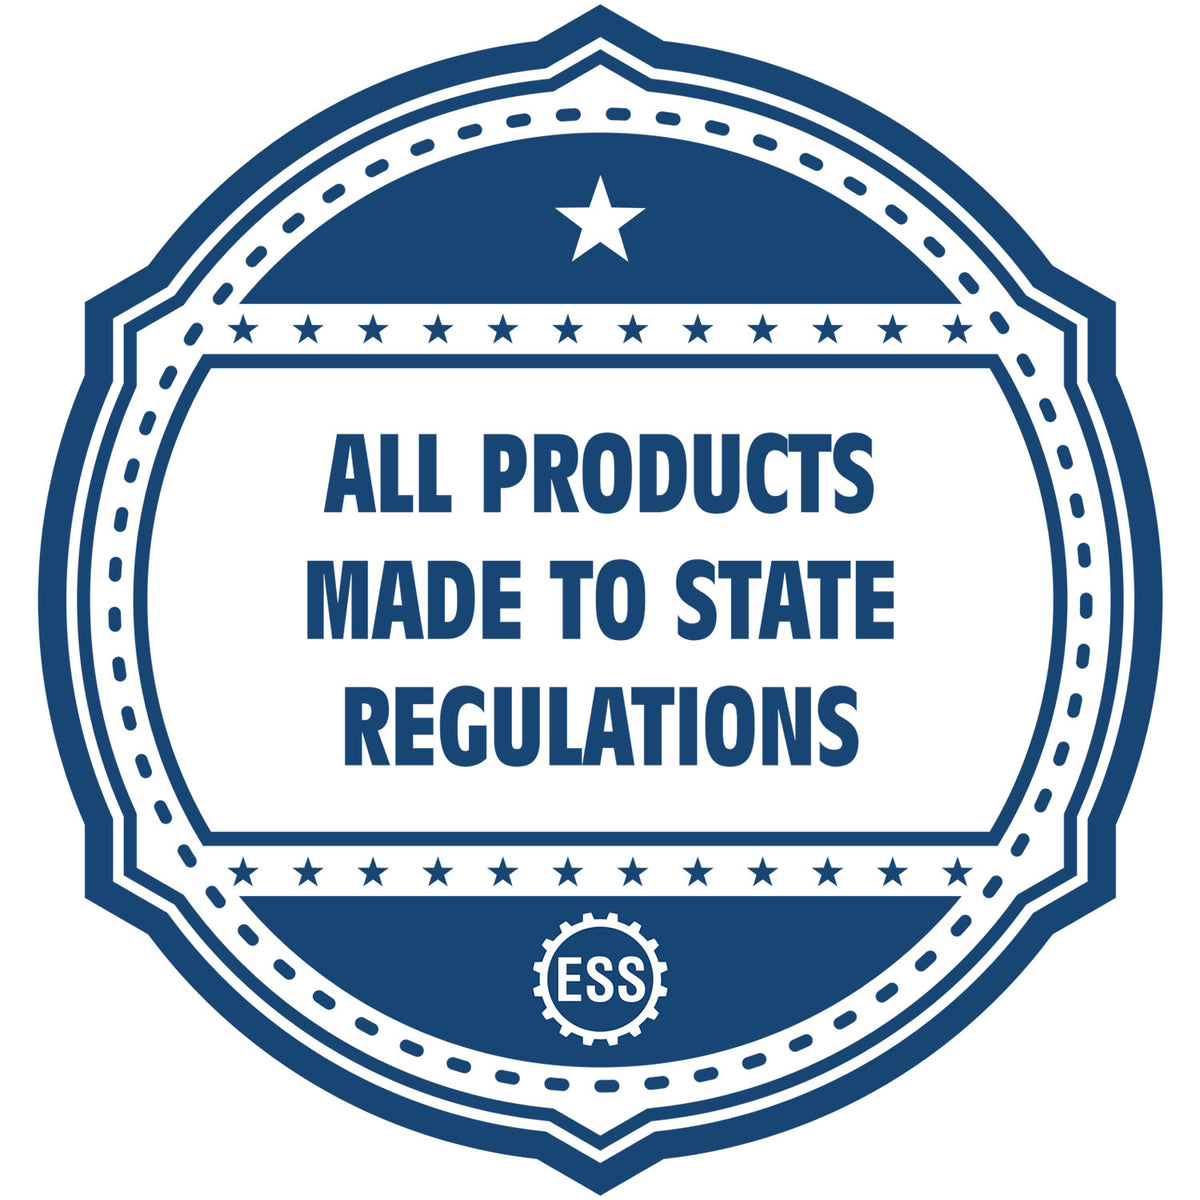 An icon or badge element for the Ohio Landscape Architectural Seal Stamp showing that this product is made in compliance with state regulations.